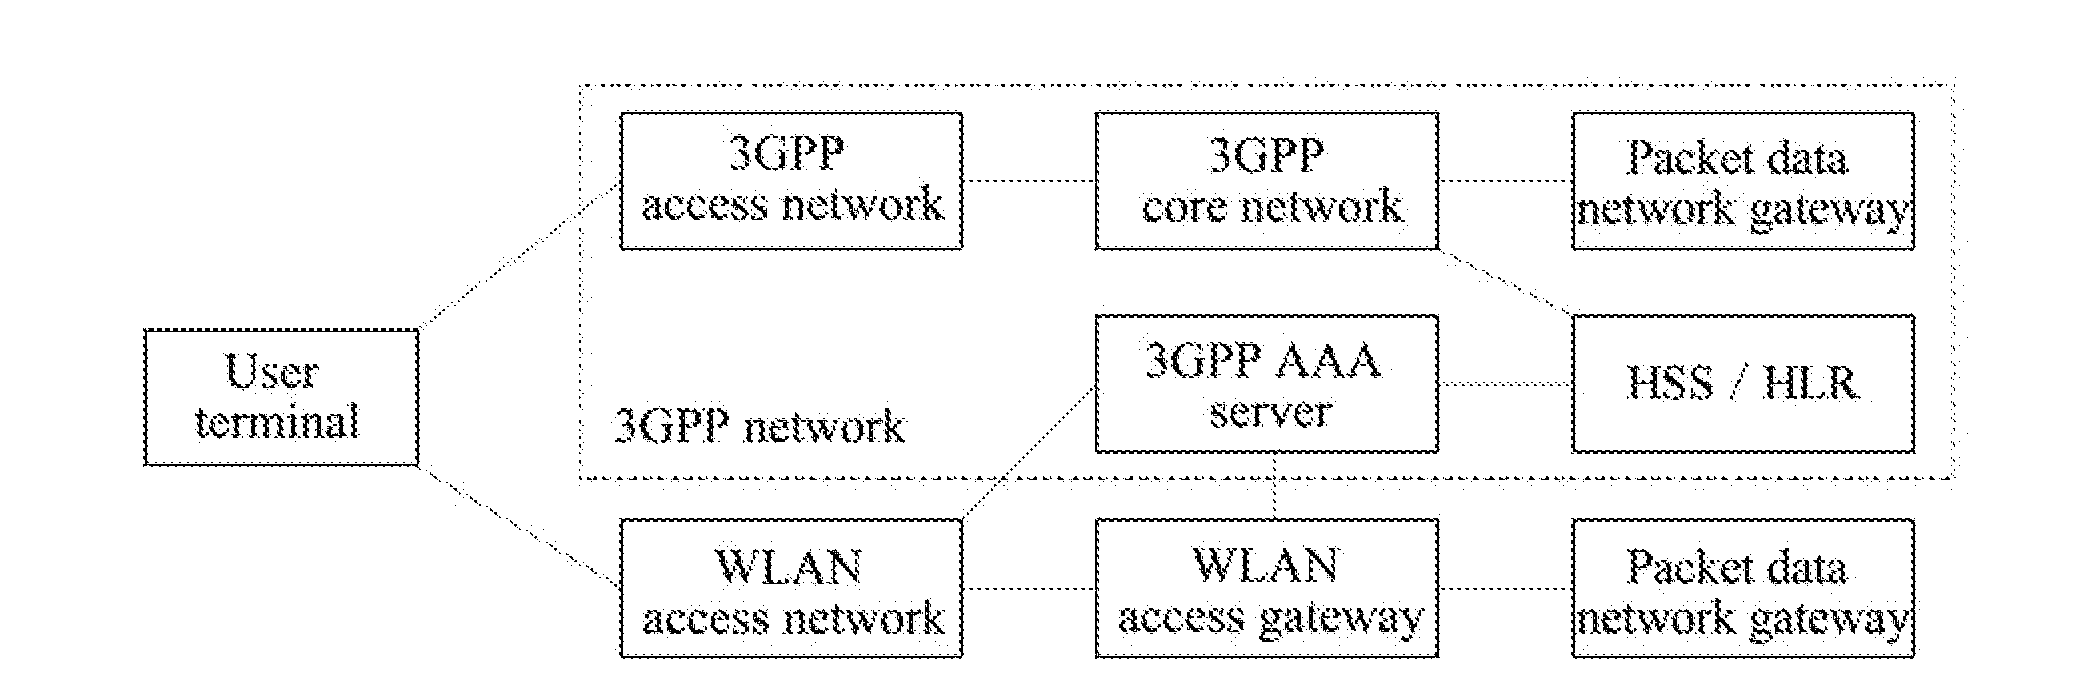 System, User Equipment and Method for Implementing Multi-network Joint Transmission